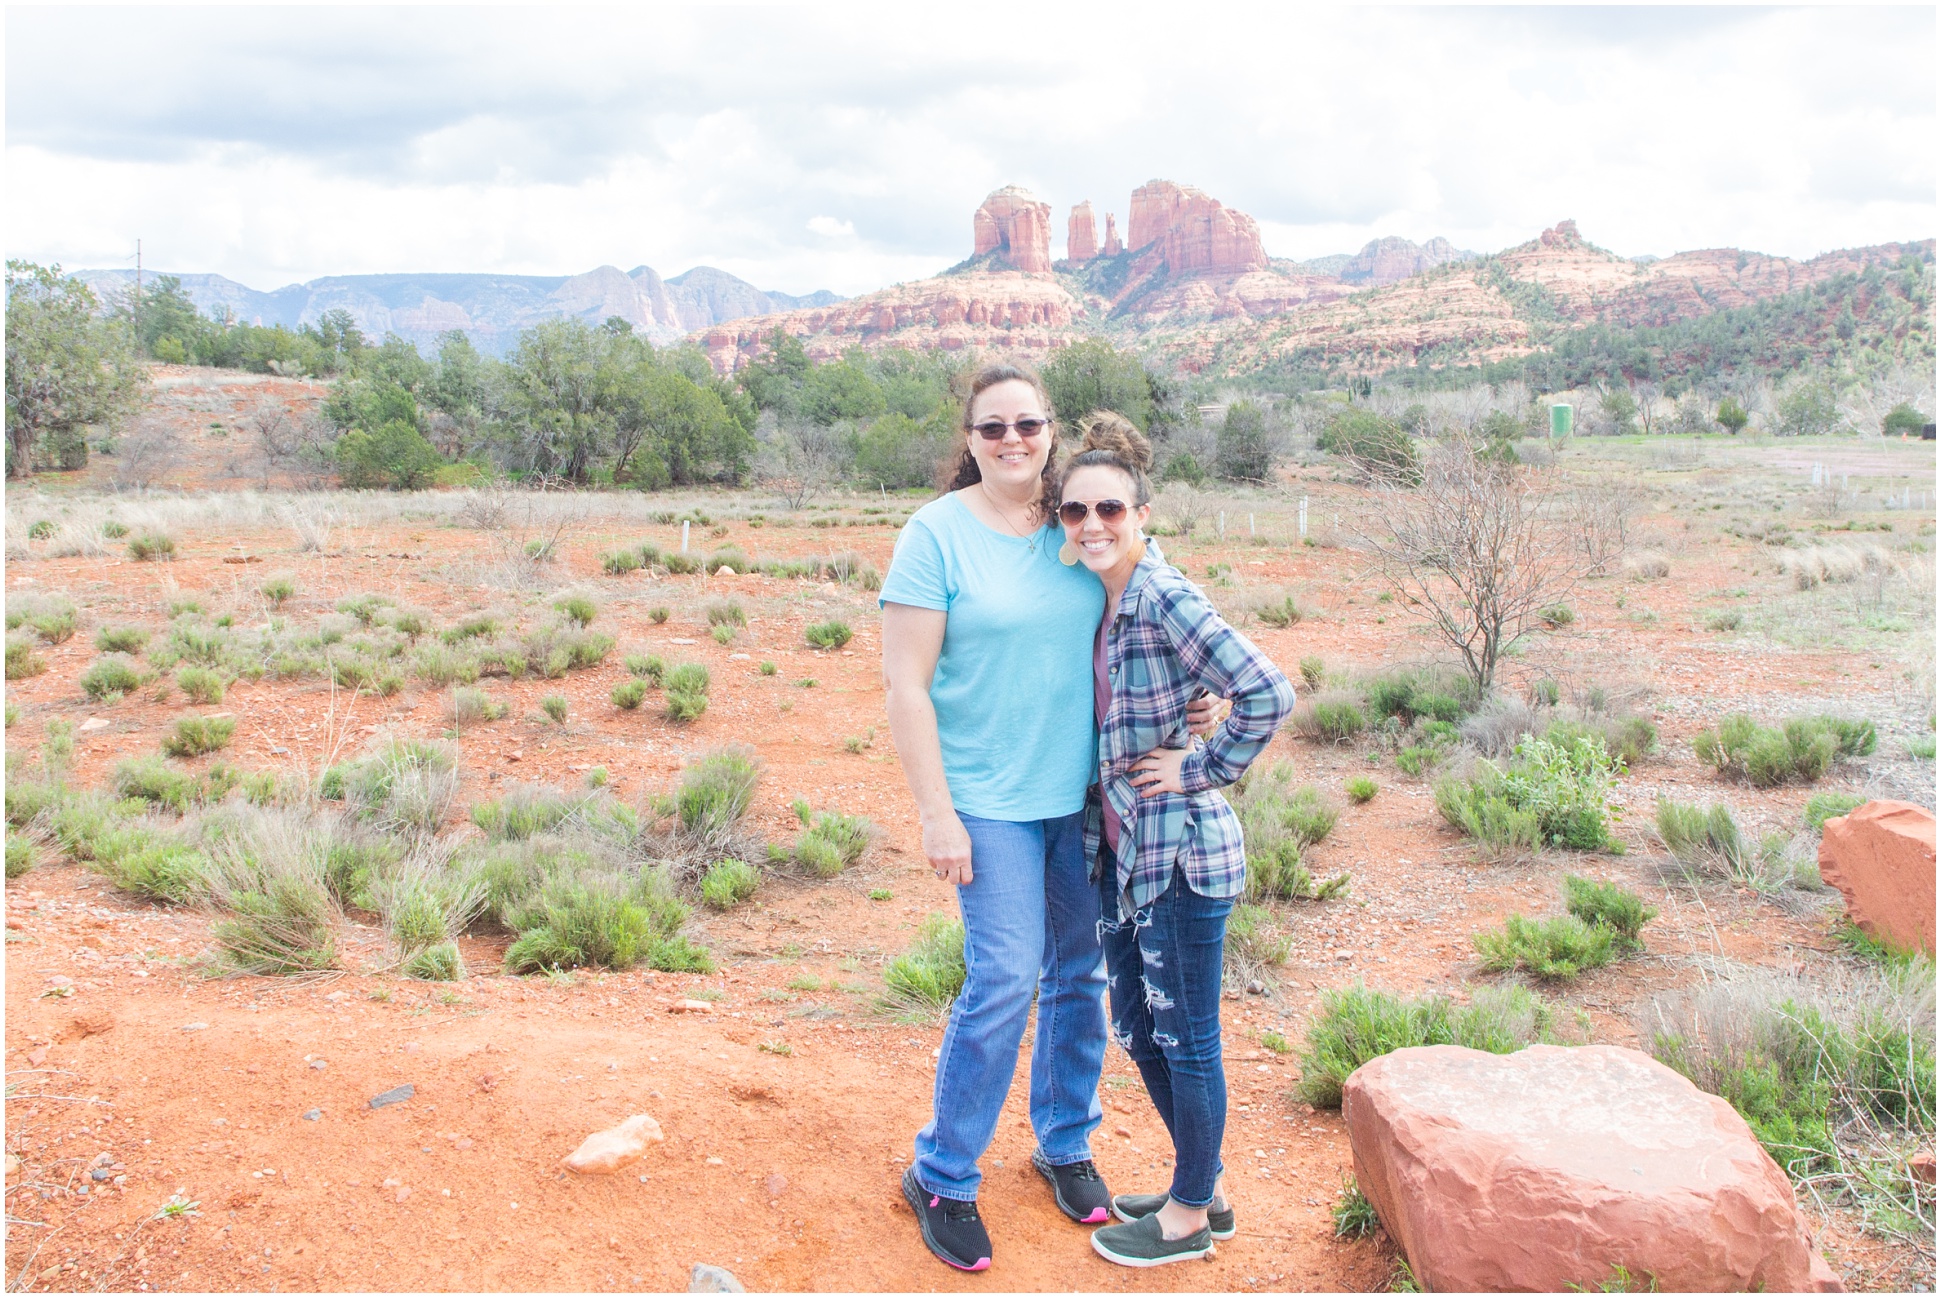 Landscape Portrait of my mom, Wendy, and me in front of the red rocks in Sedona, Arizona